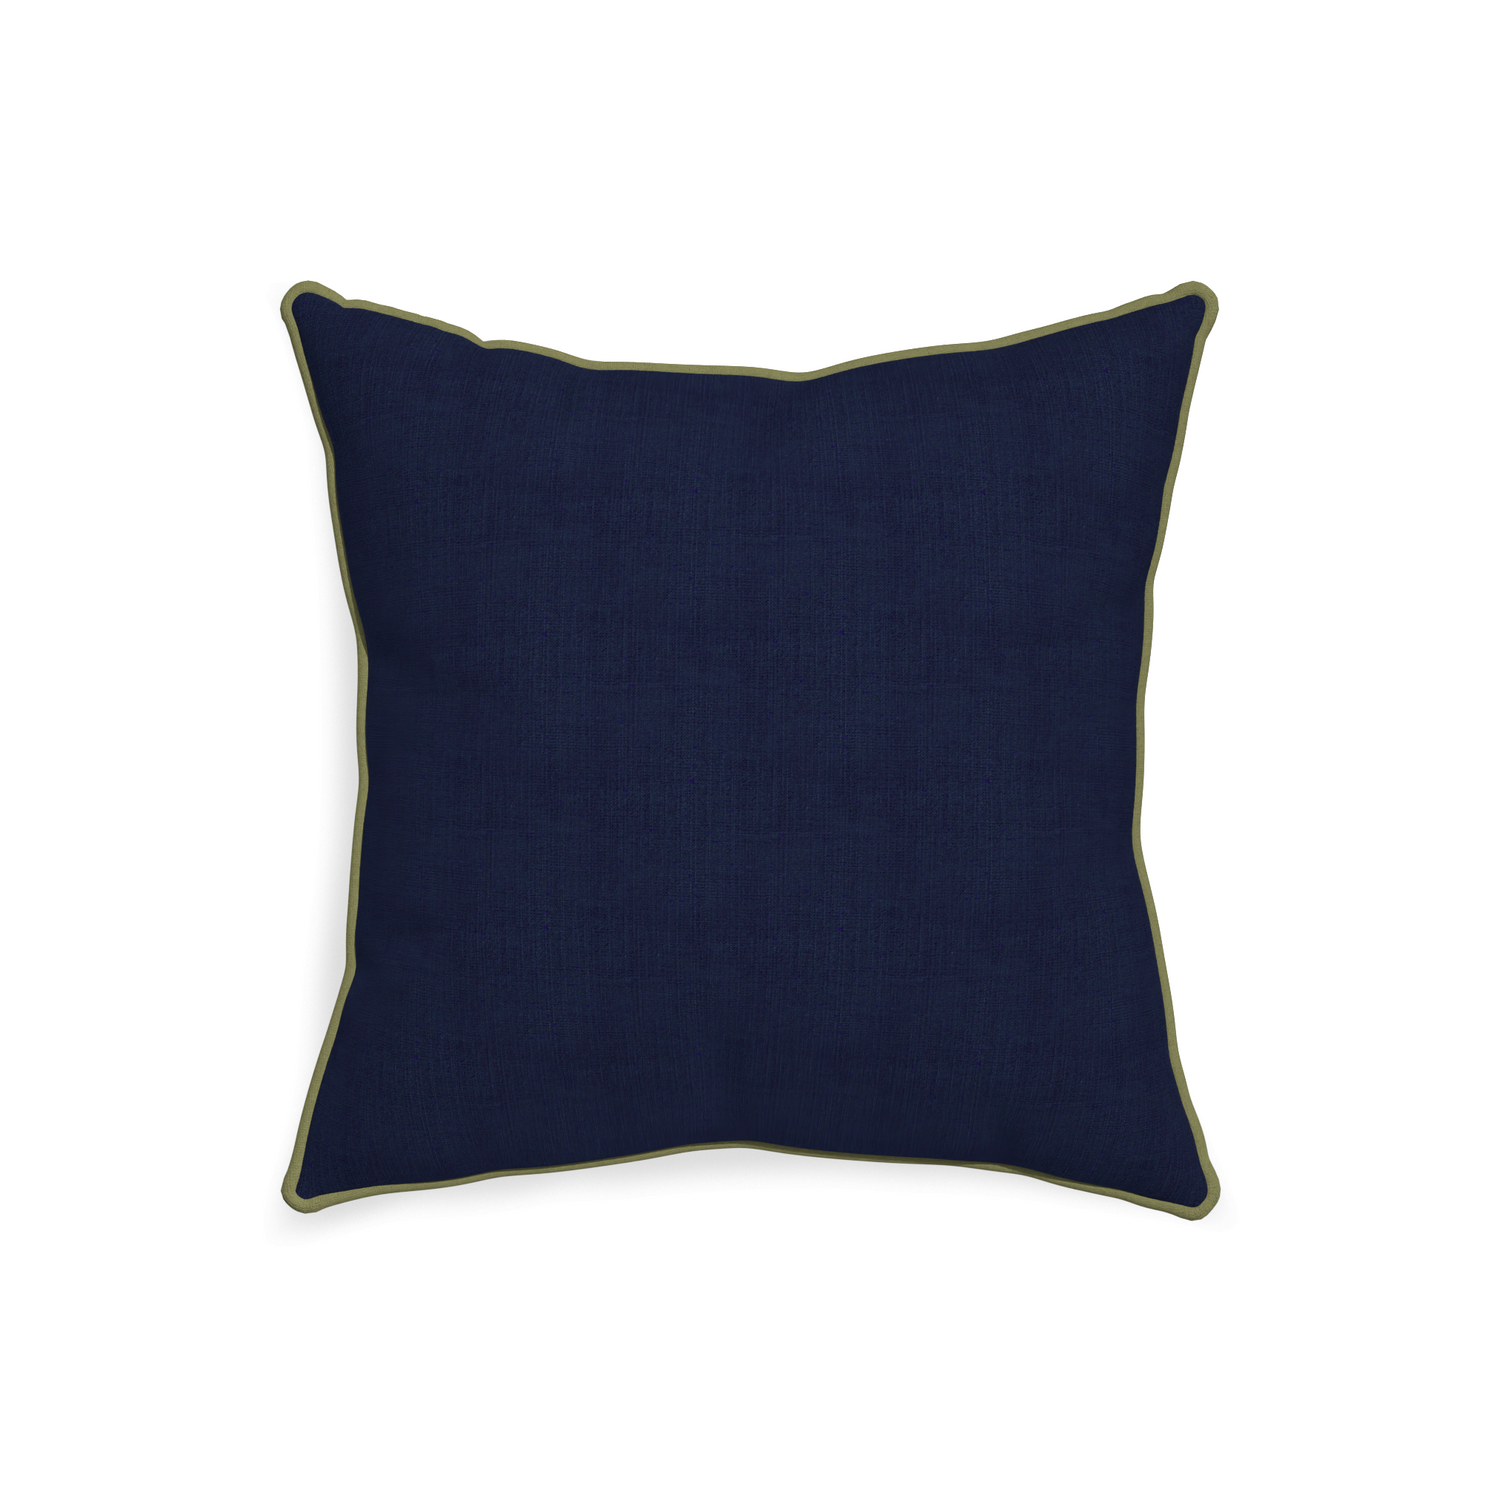 20-square midnight custom pillow with moss piping on white background